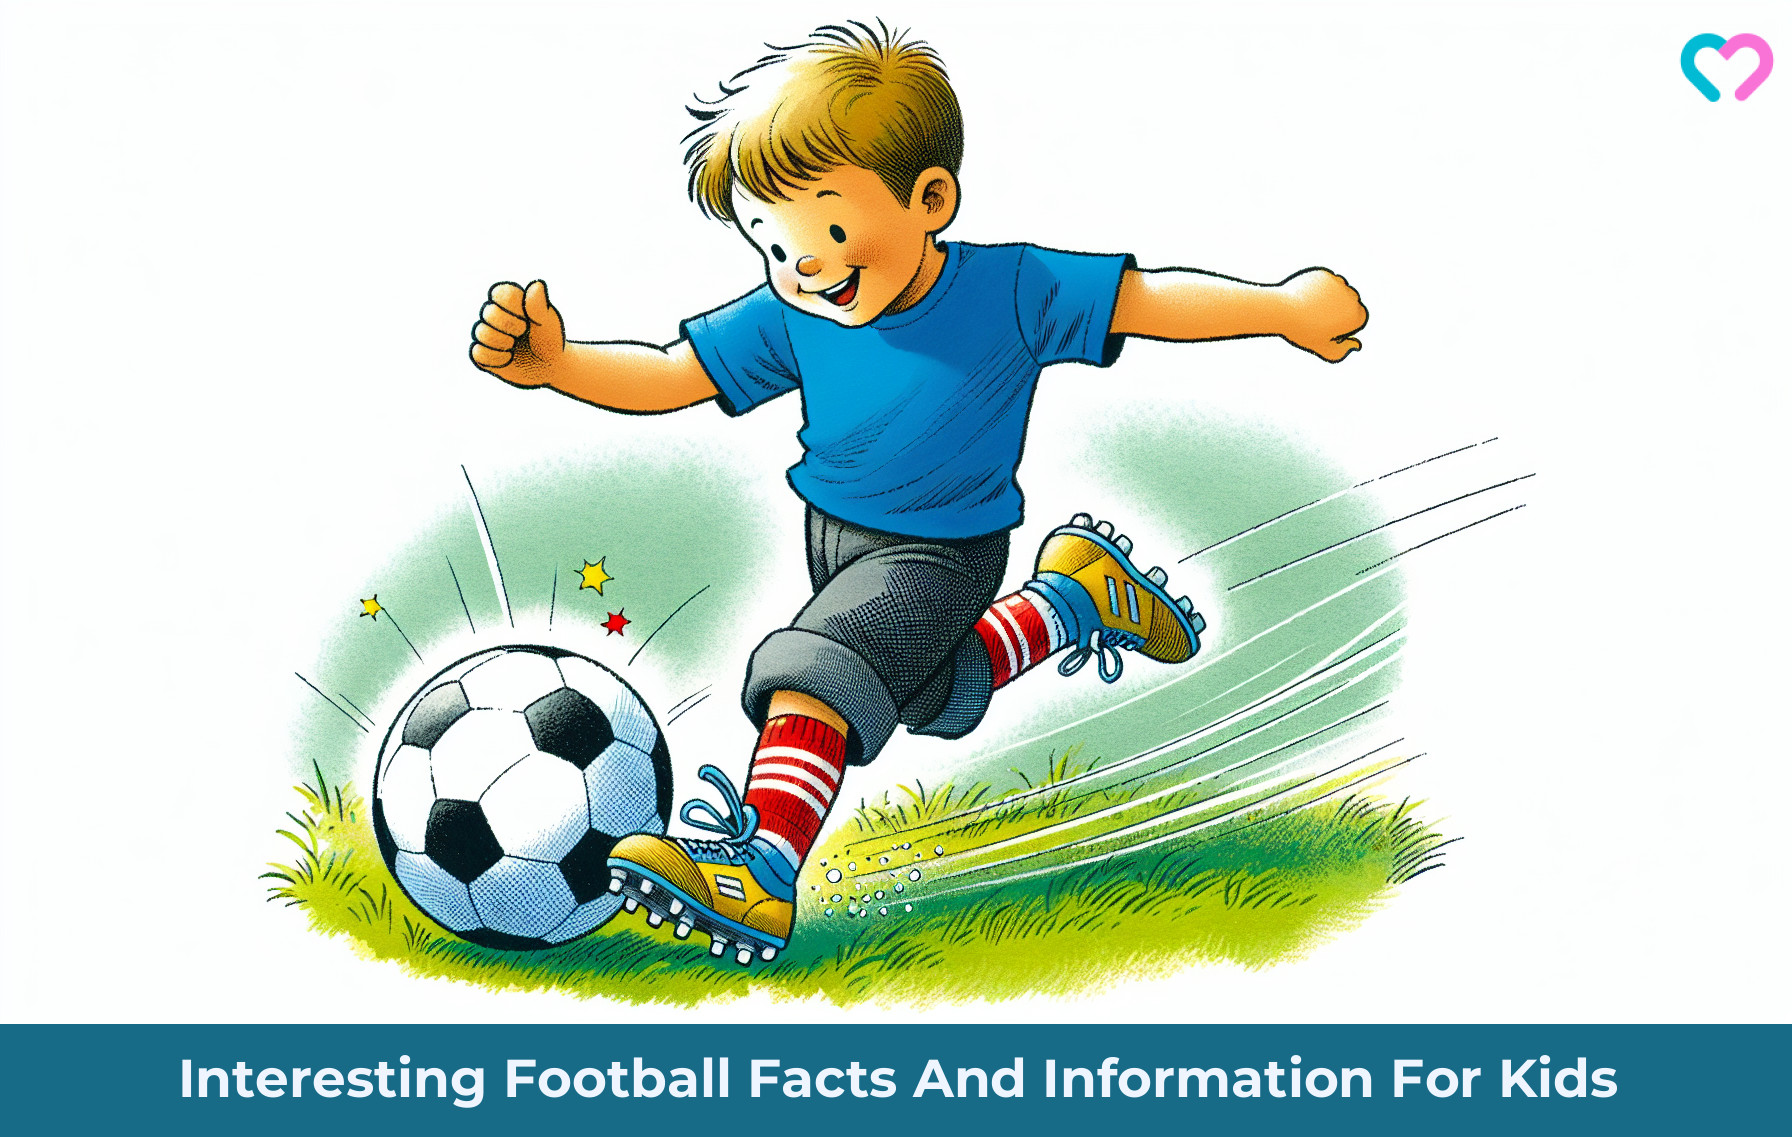 Football Facts For Kids_illustration